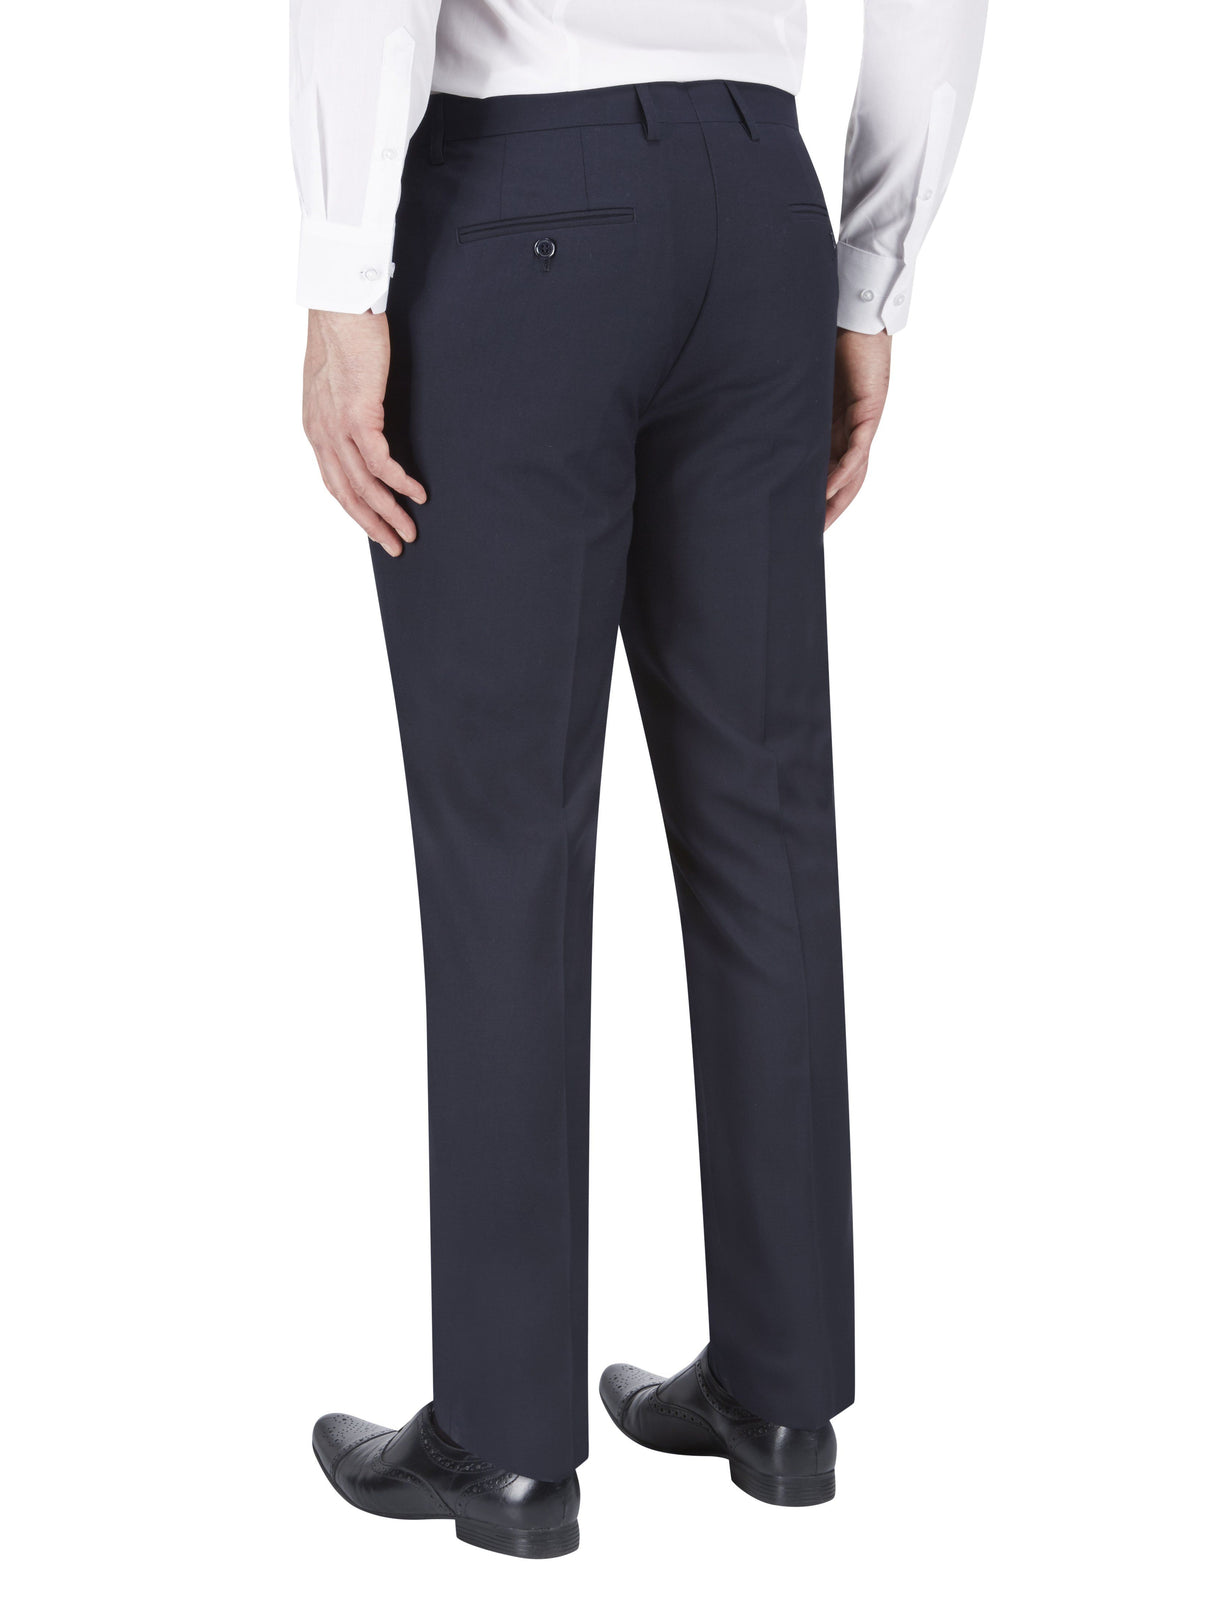 Skopes Madrid X-Tall Navy Suit Trousers Navy